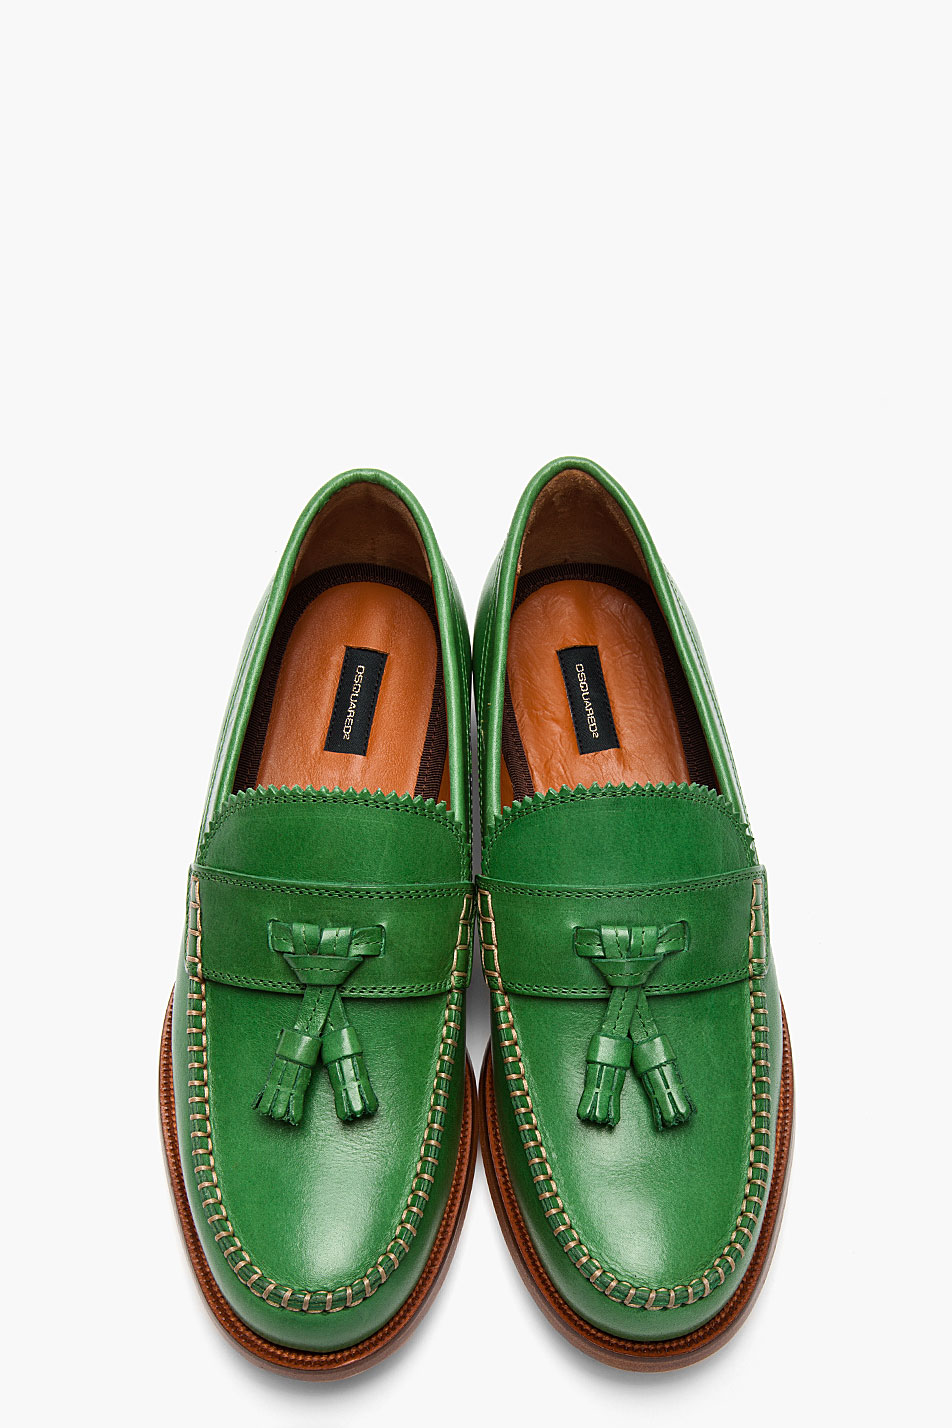 DSquared² Green Leather Classic College Tassled Penny Loafers for Men | Lyst